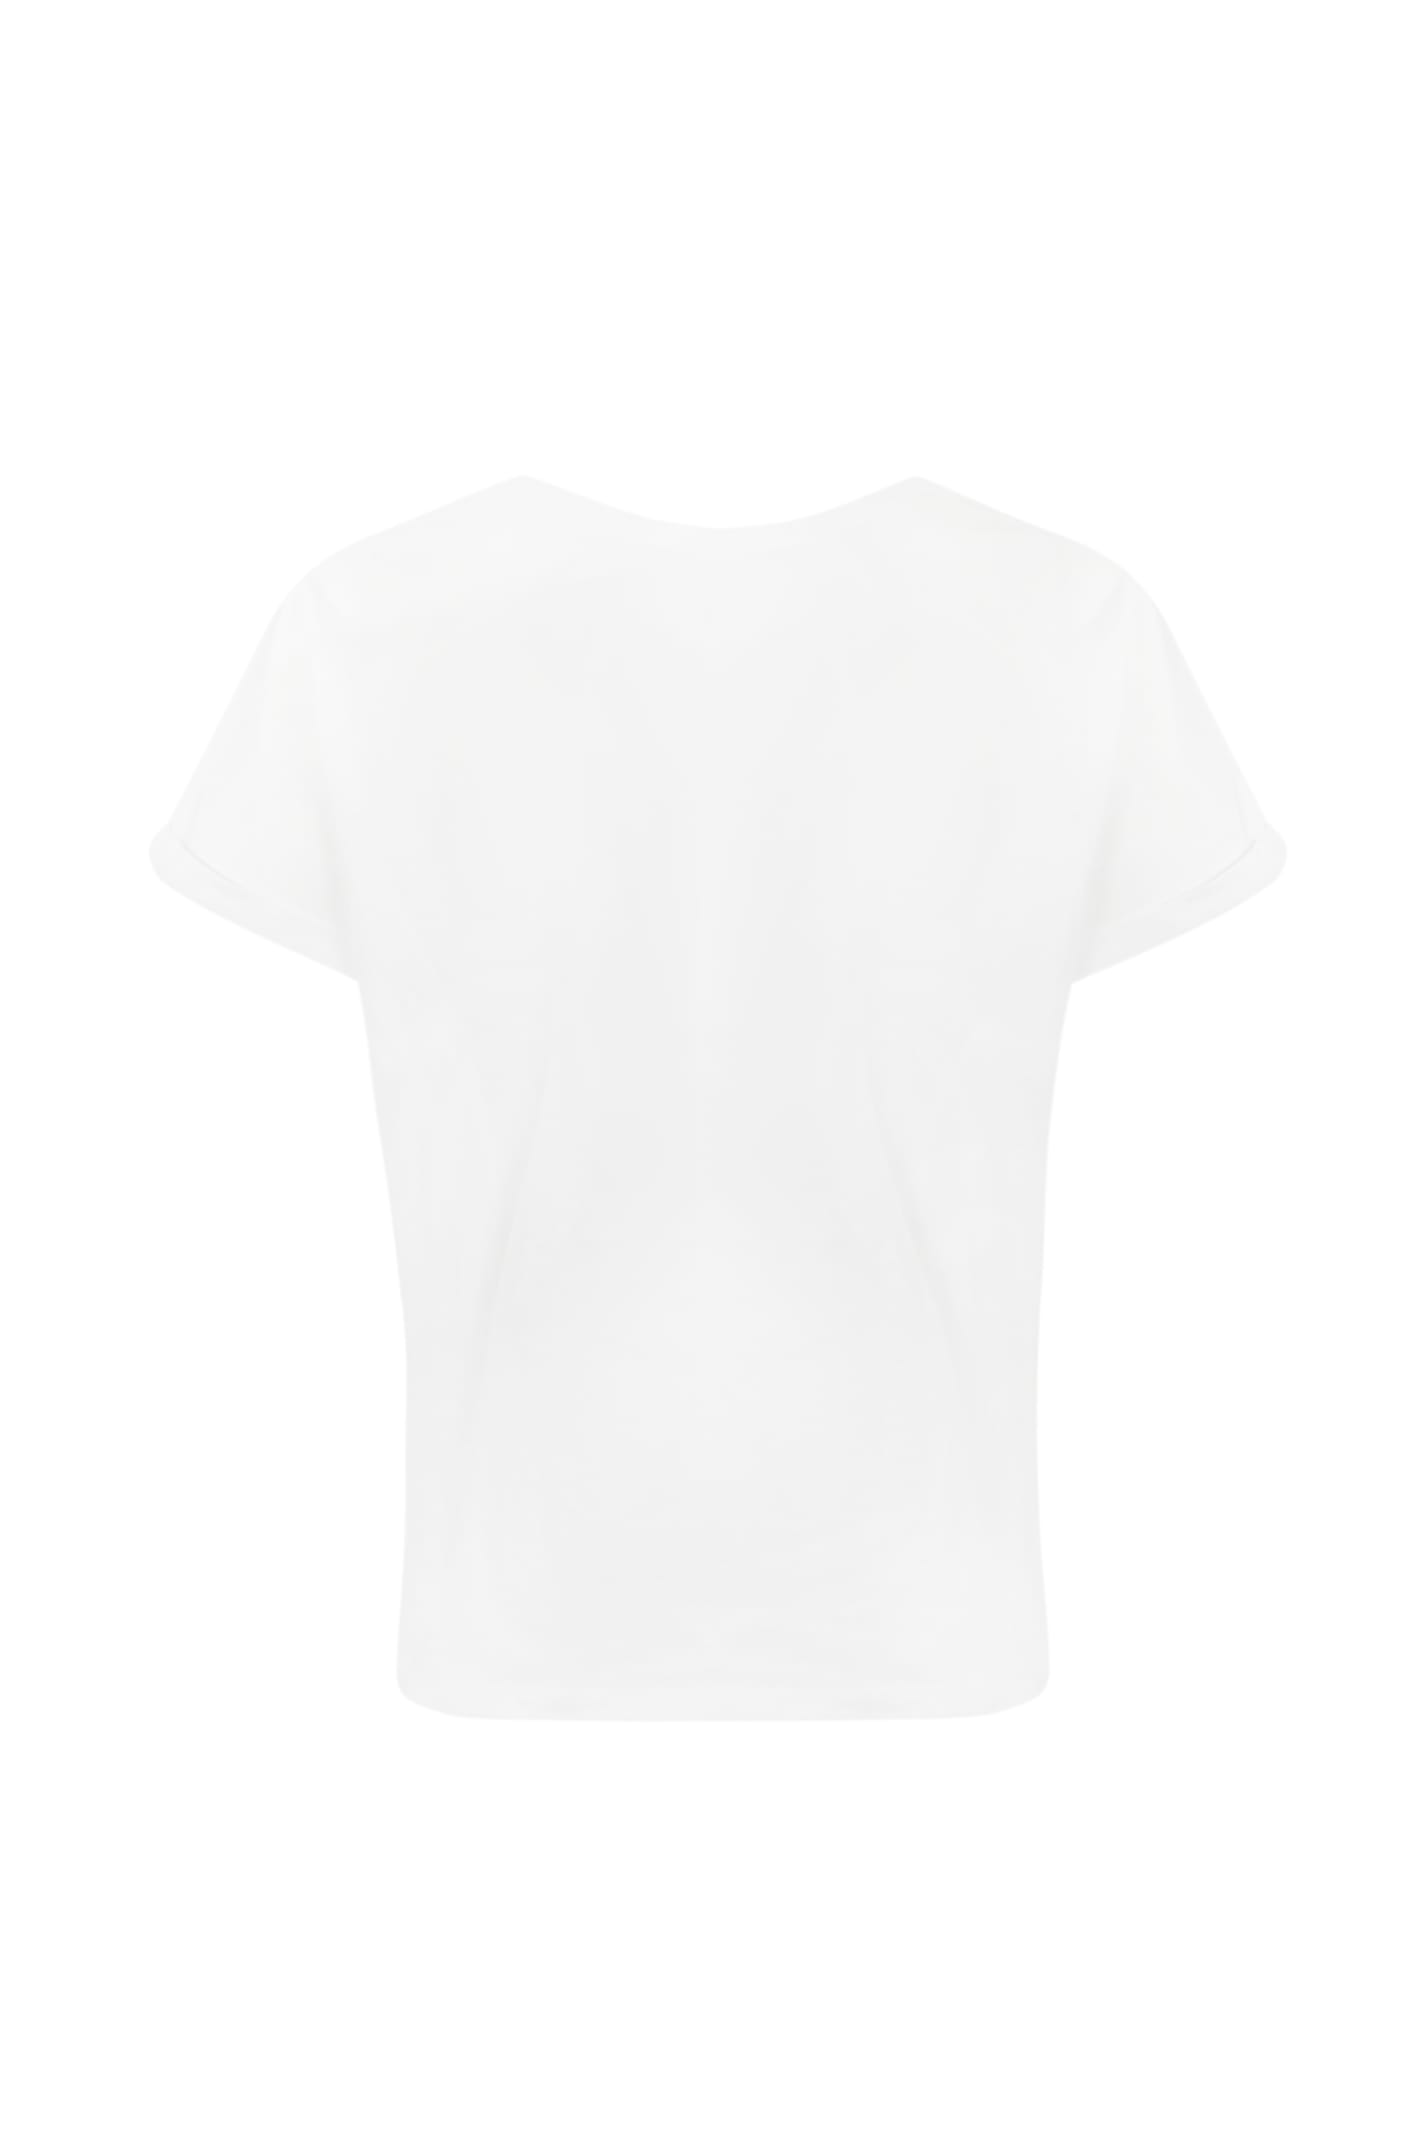 Shop Twinset T-shirt With Label And Rhinestones In Bianco